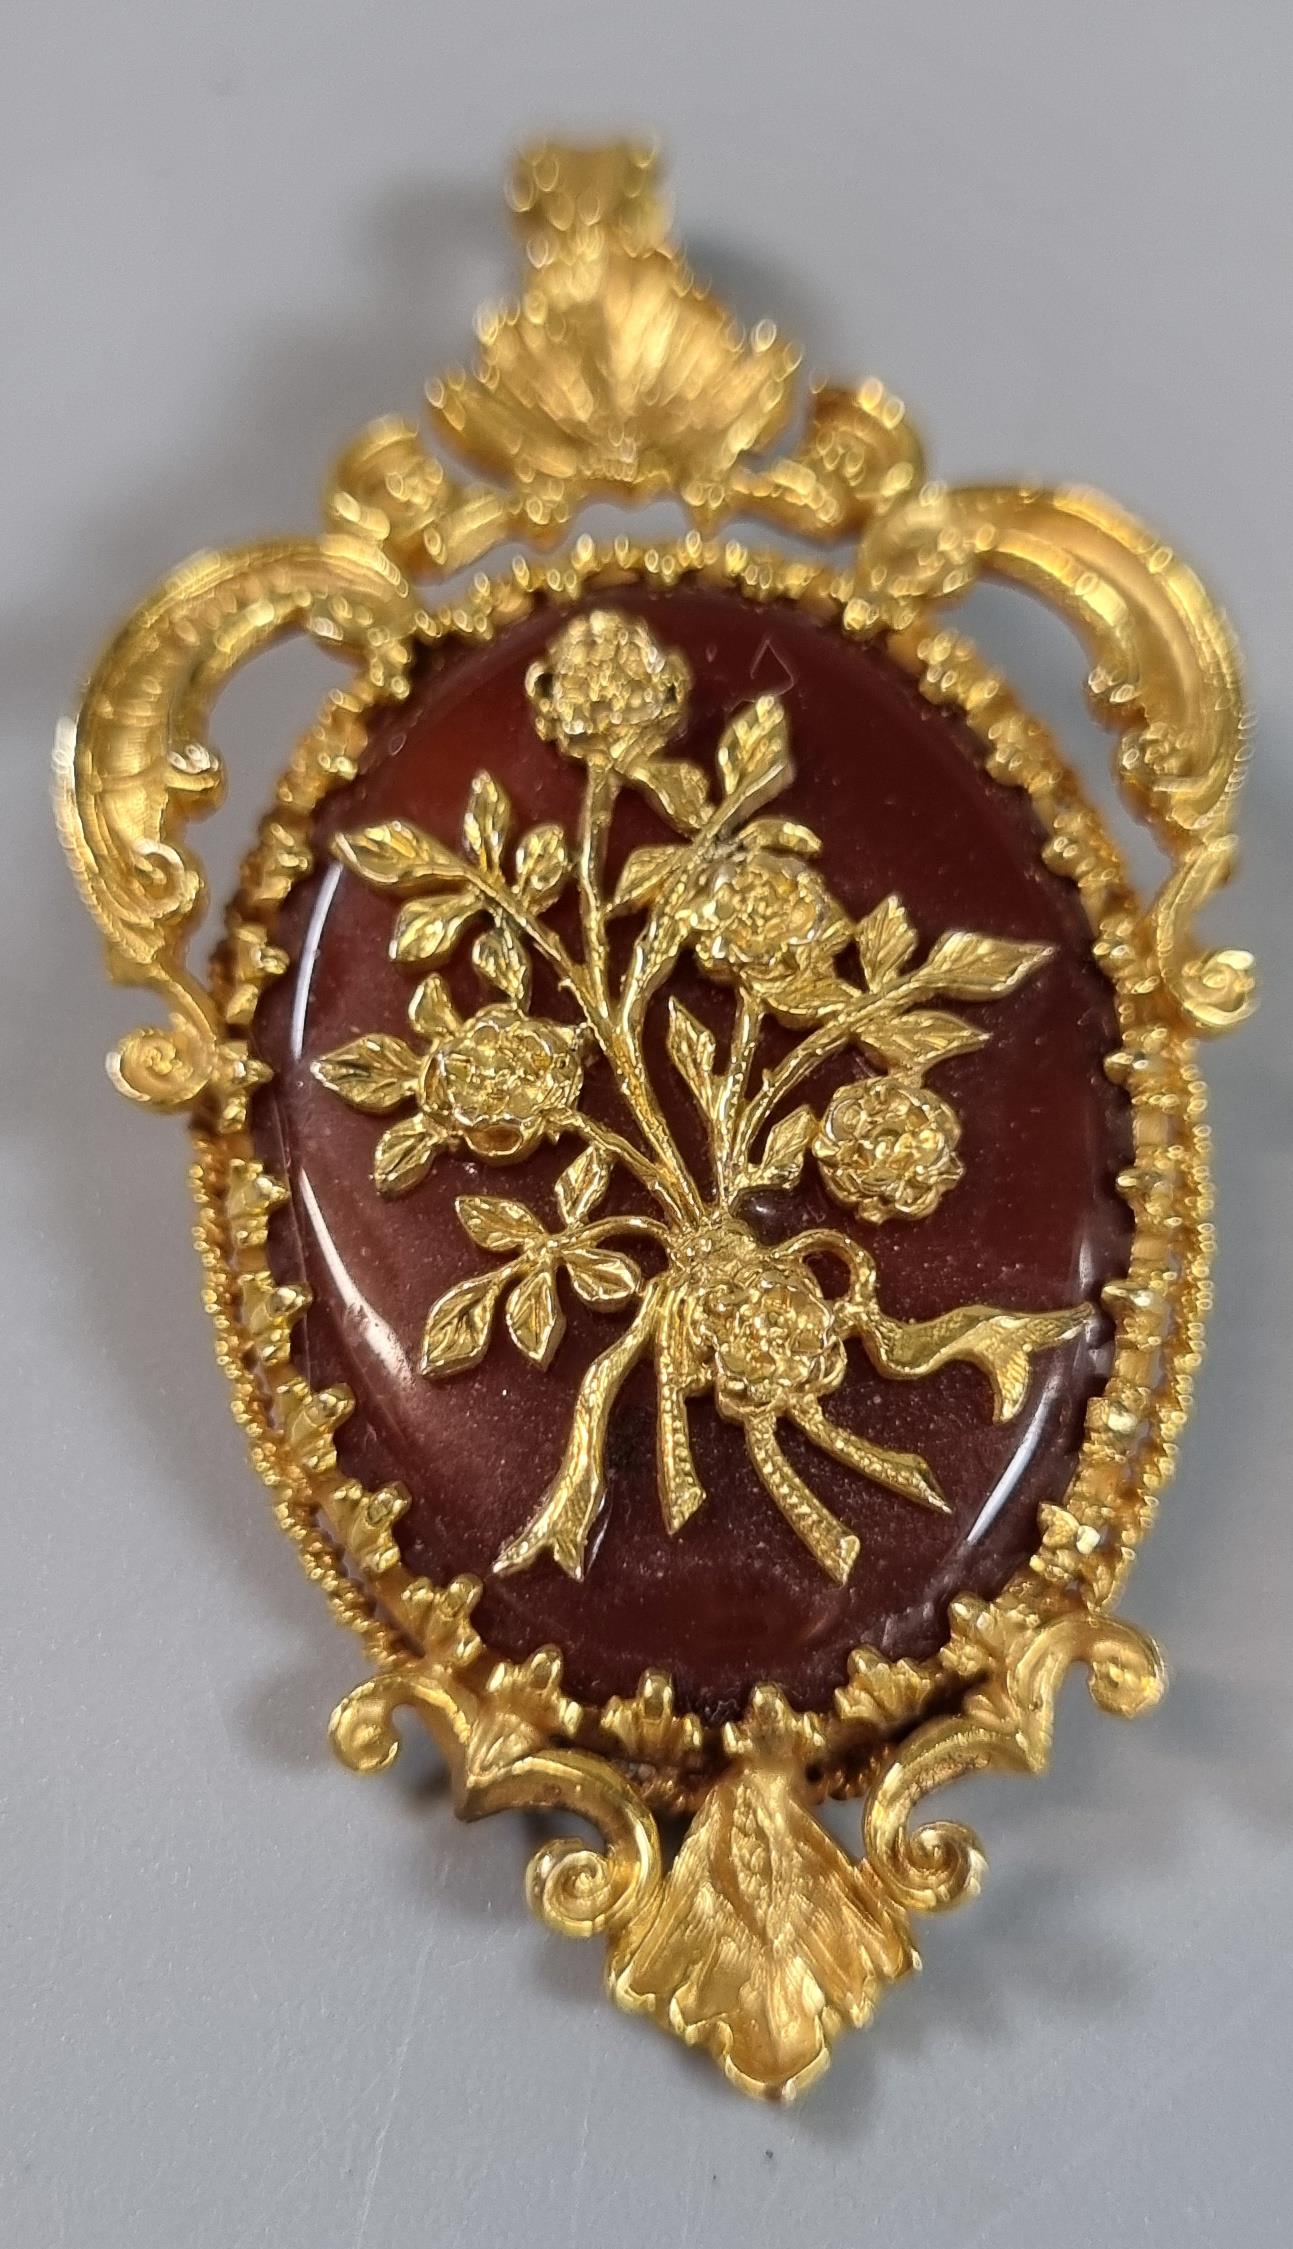 Victorian carnelian pendant in floral hallmarked 9ct gold mount. 20g approx. (B.P. 21% + VAT) - Image 2 of 2